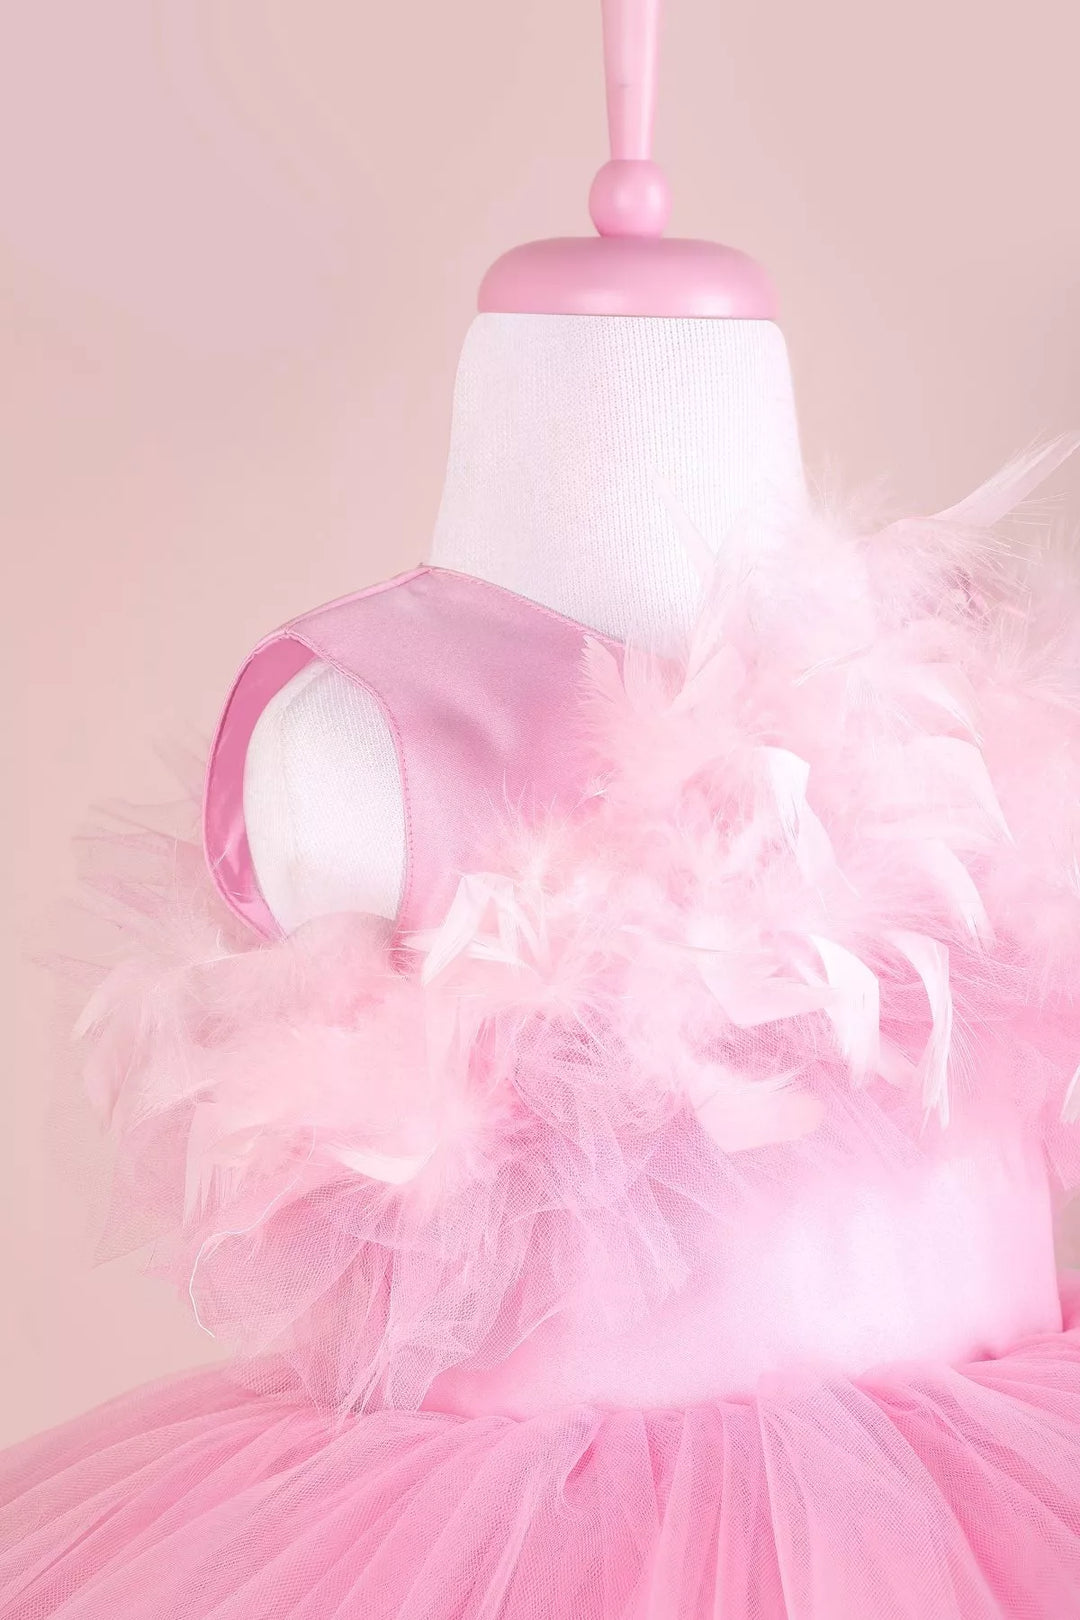 Close up view of a pink princess wedding dress. The dress has satin top and feathers on chest